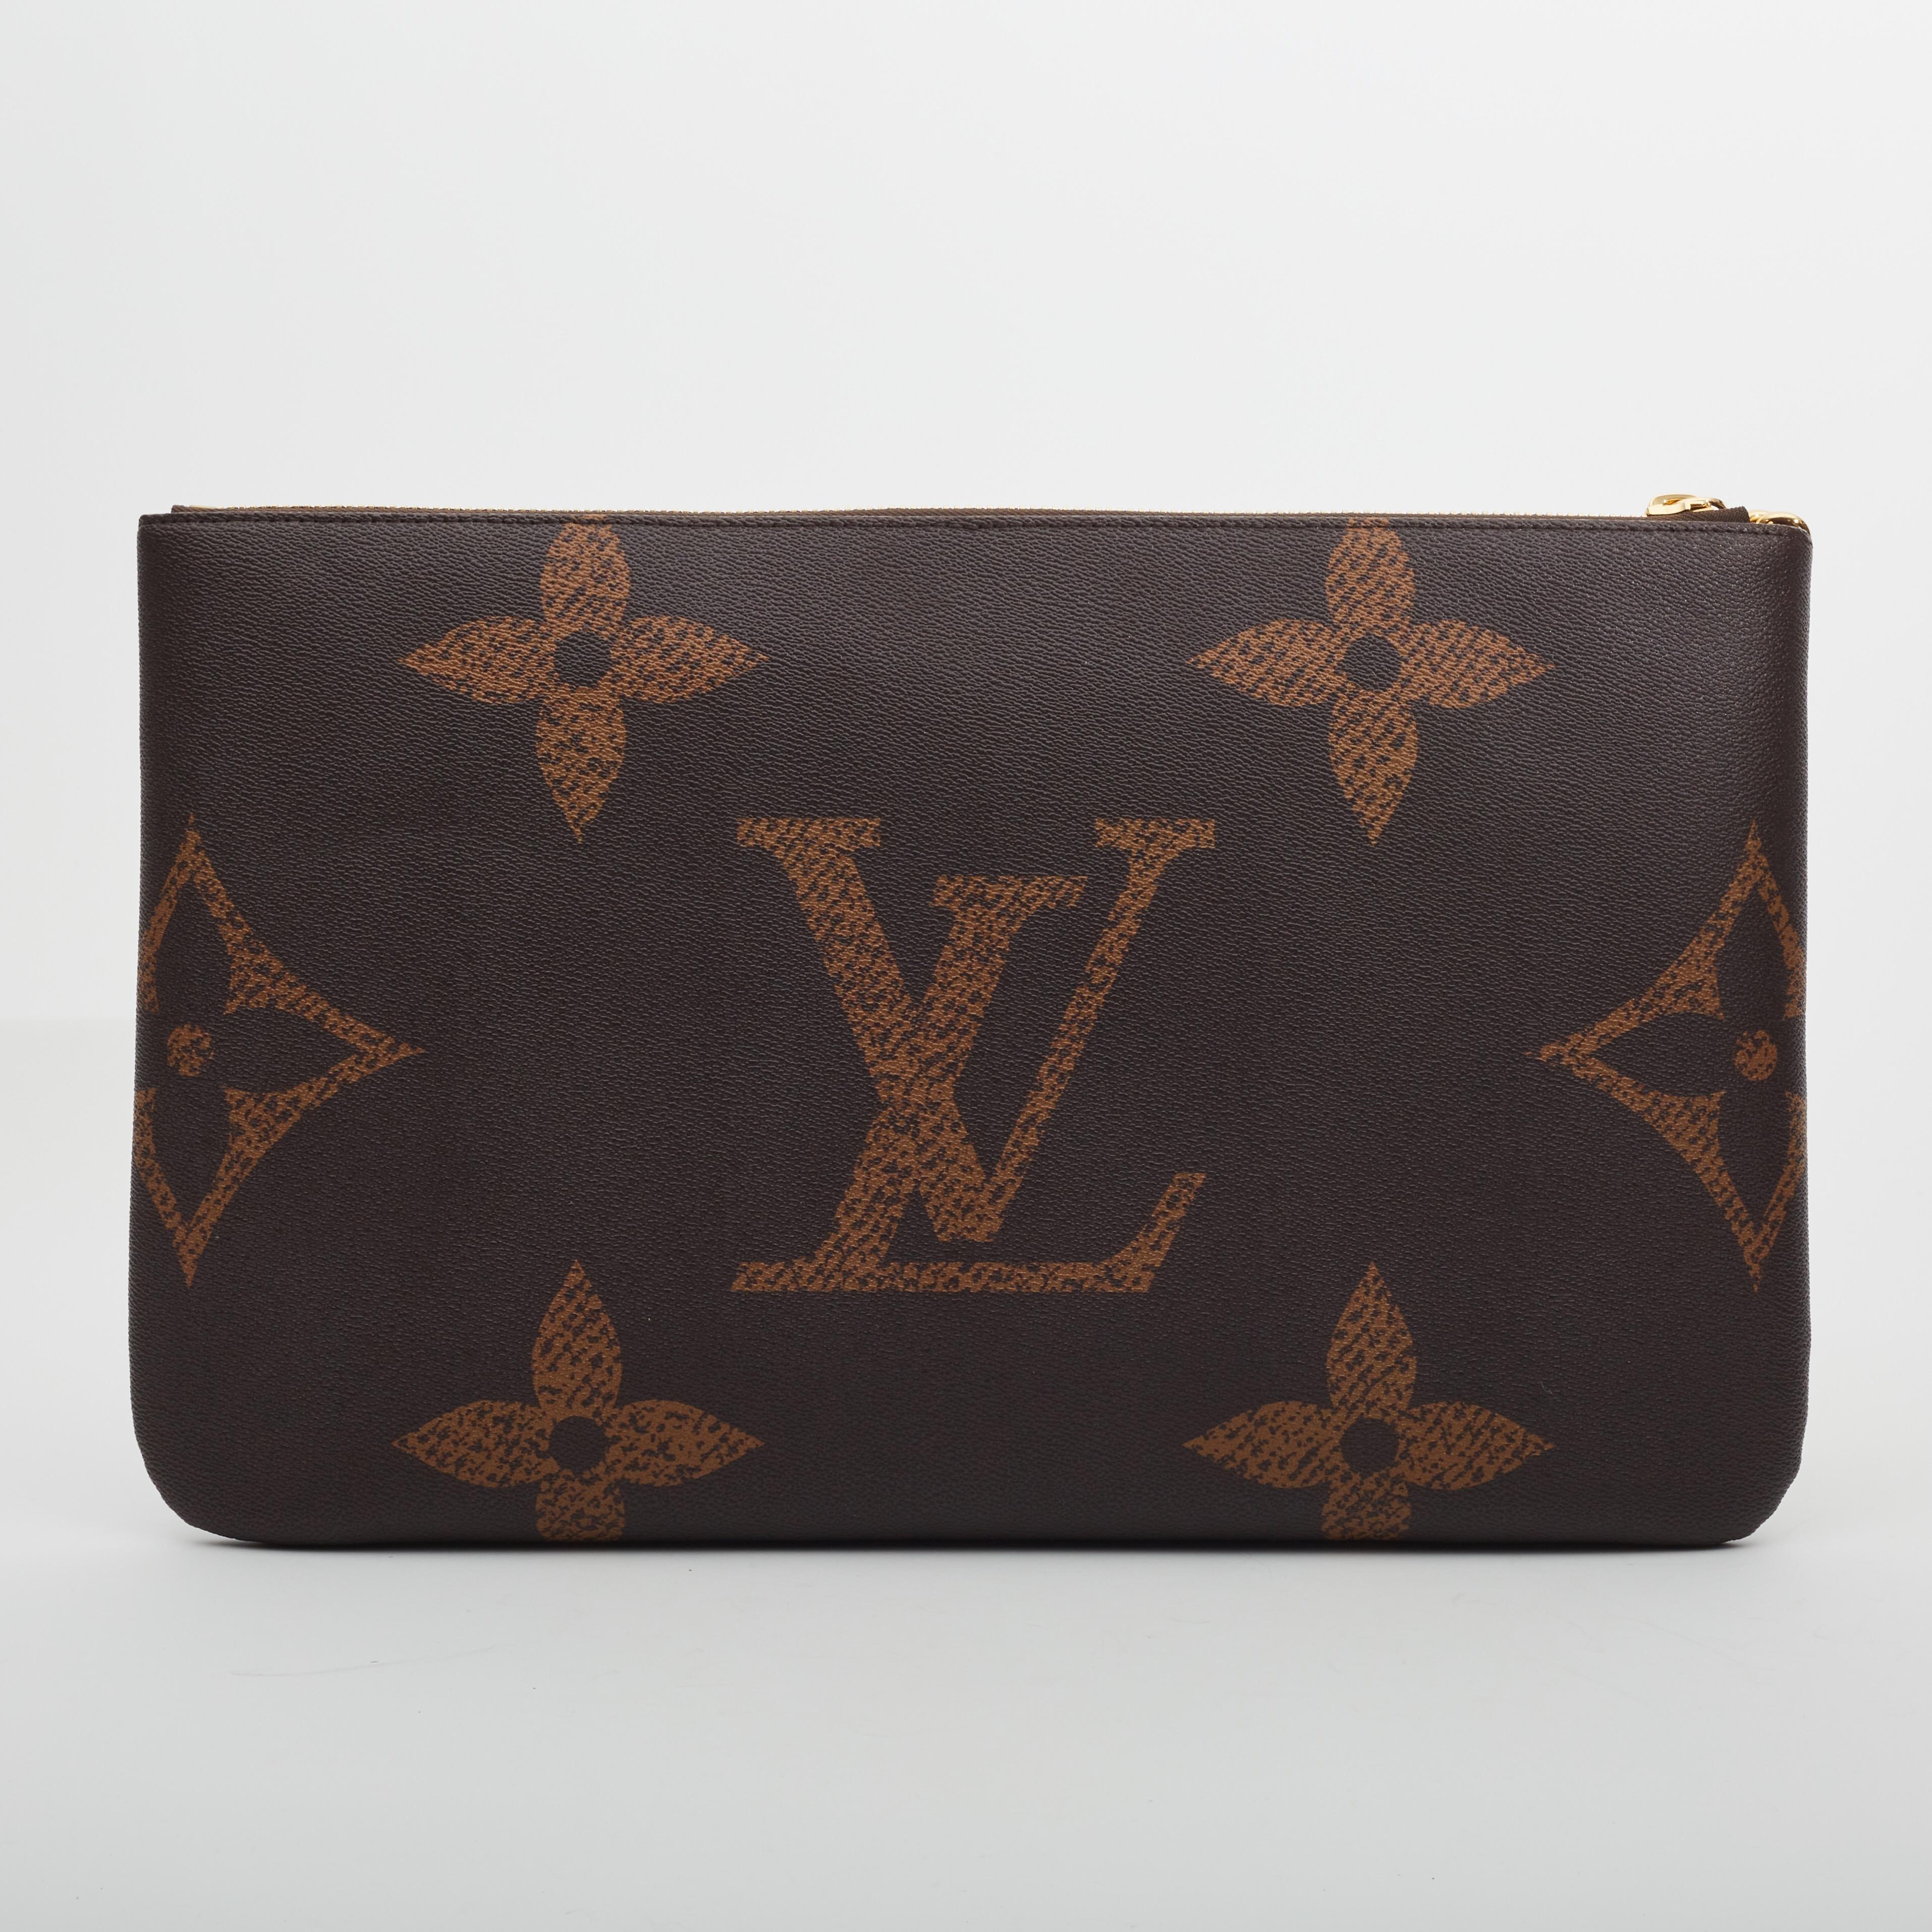 Louis Vuitton - Authenticated Kirigami Clutch Bag - Leather Brown Plain for Women, Never Worn